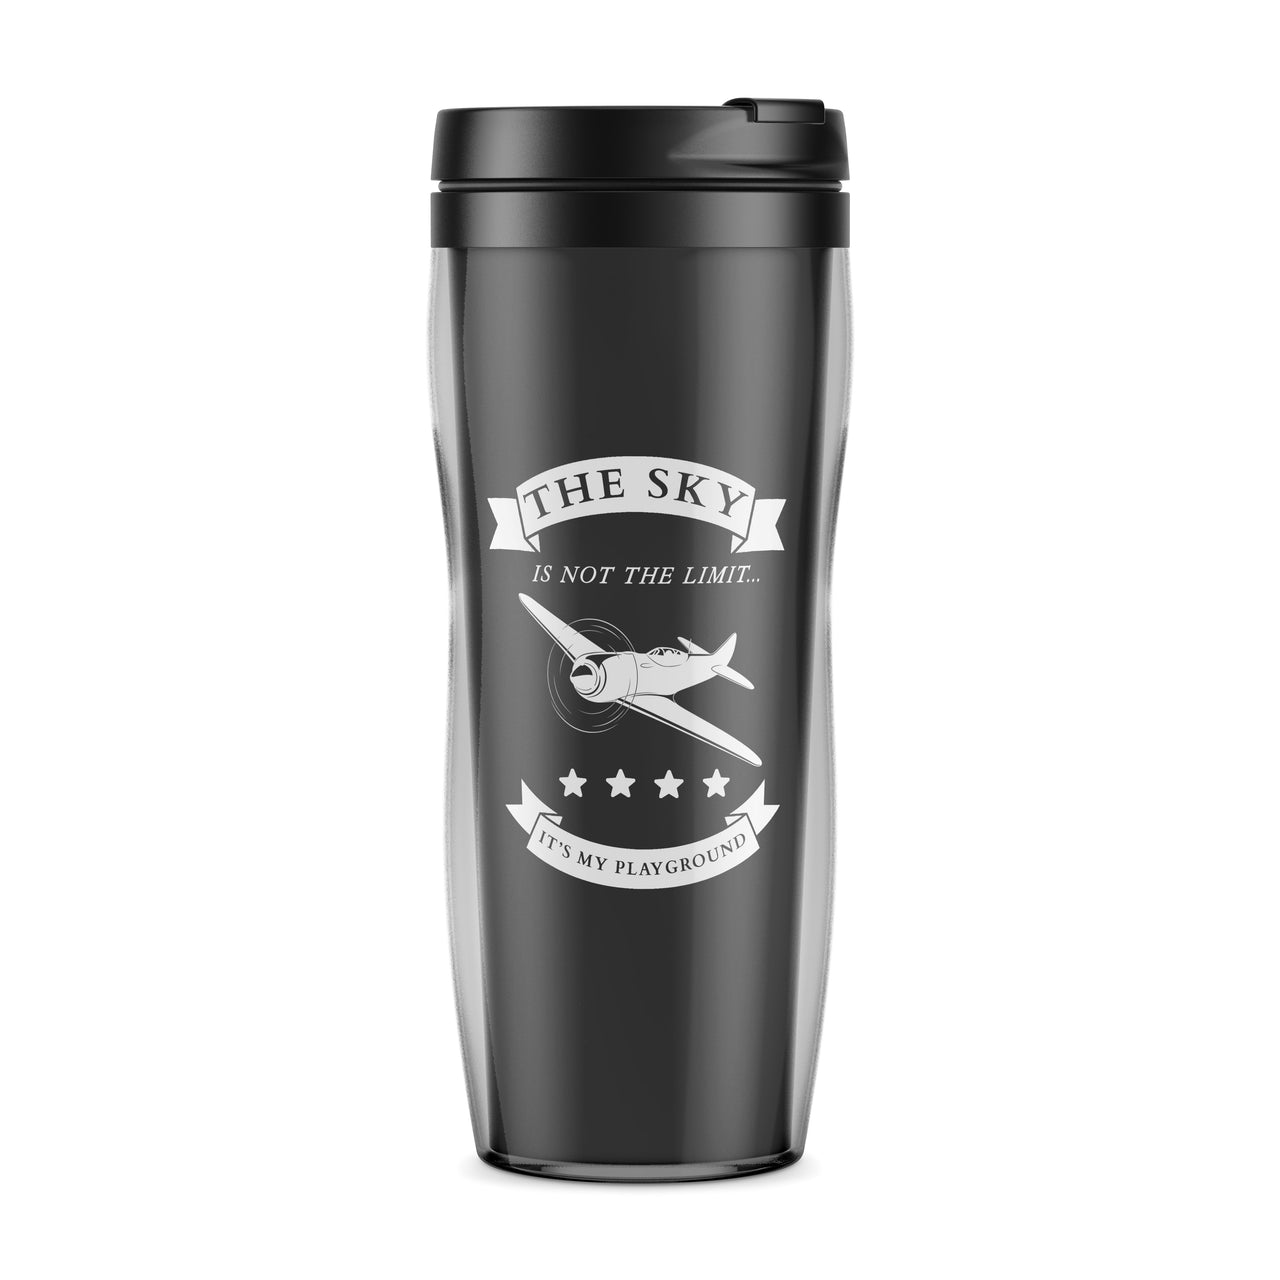 The Sky is not the limit, It's my playground Designed Travel Mugs